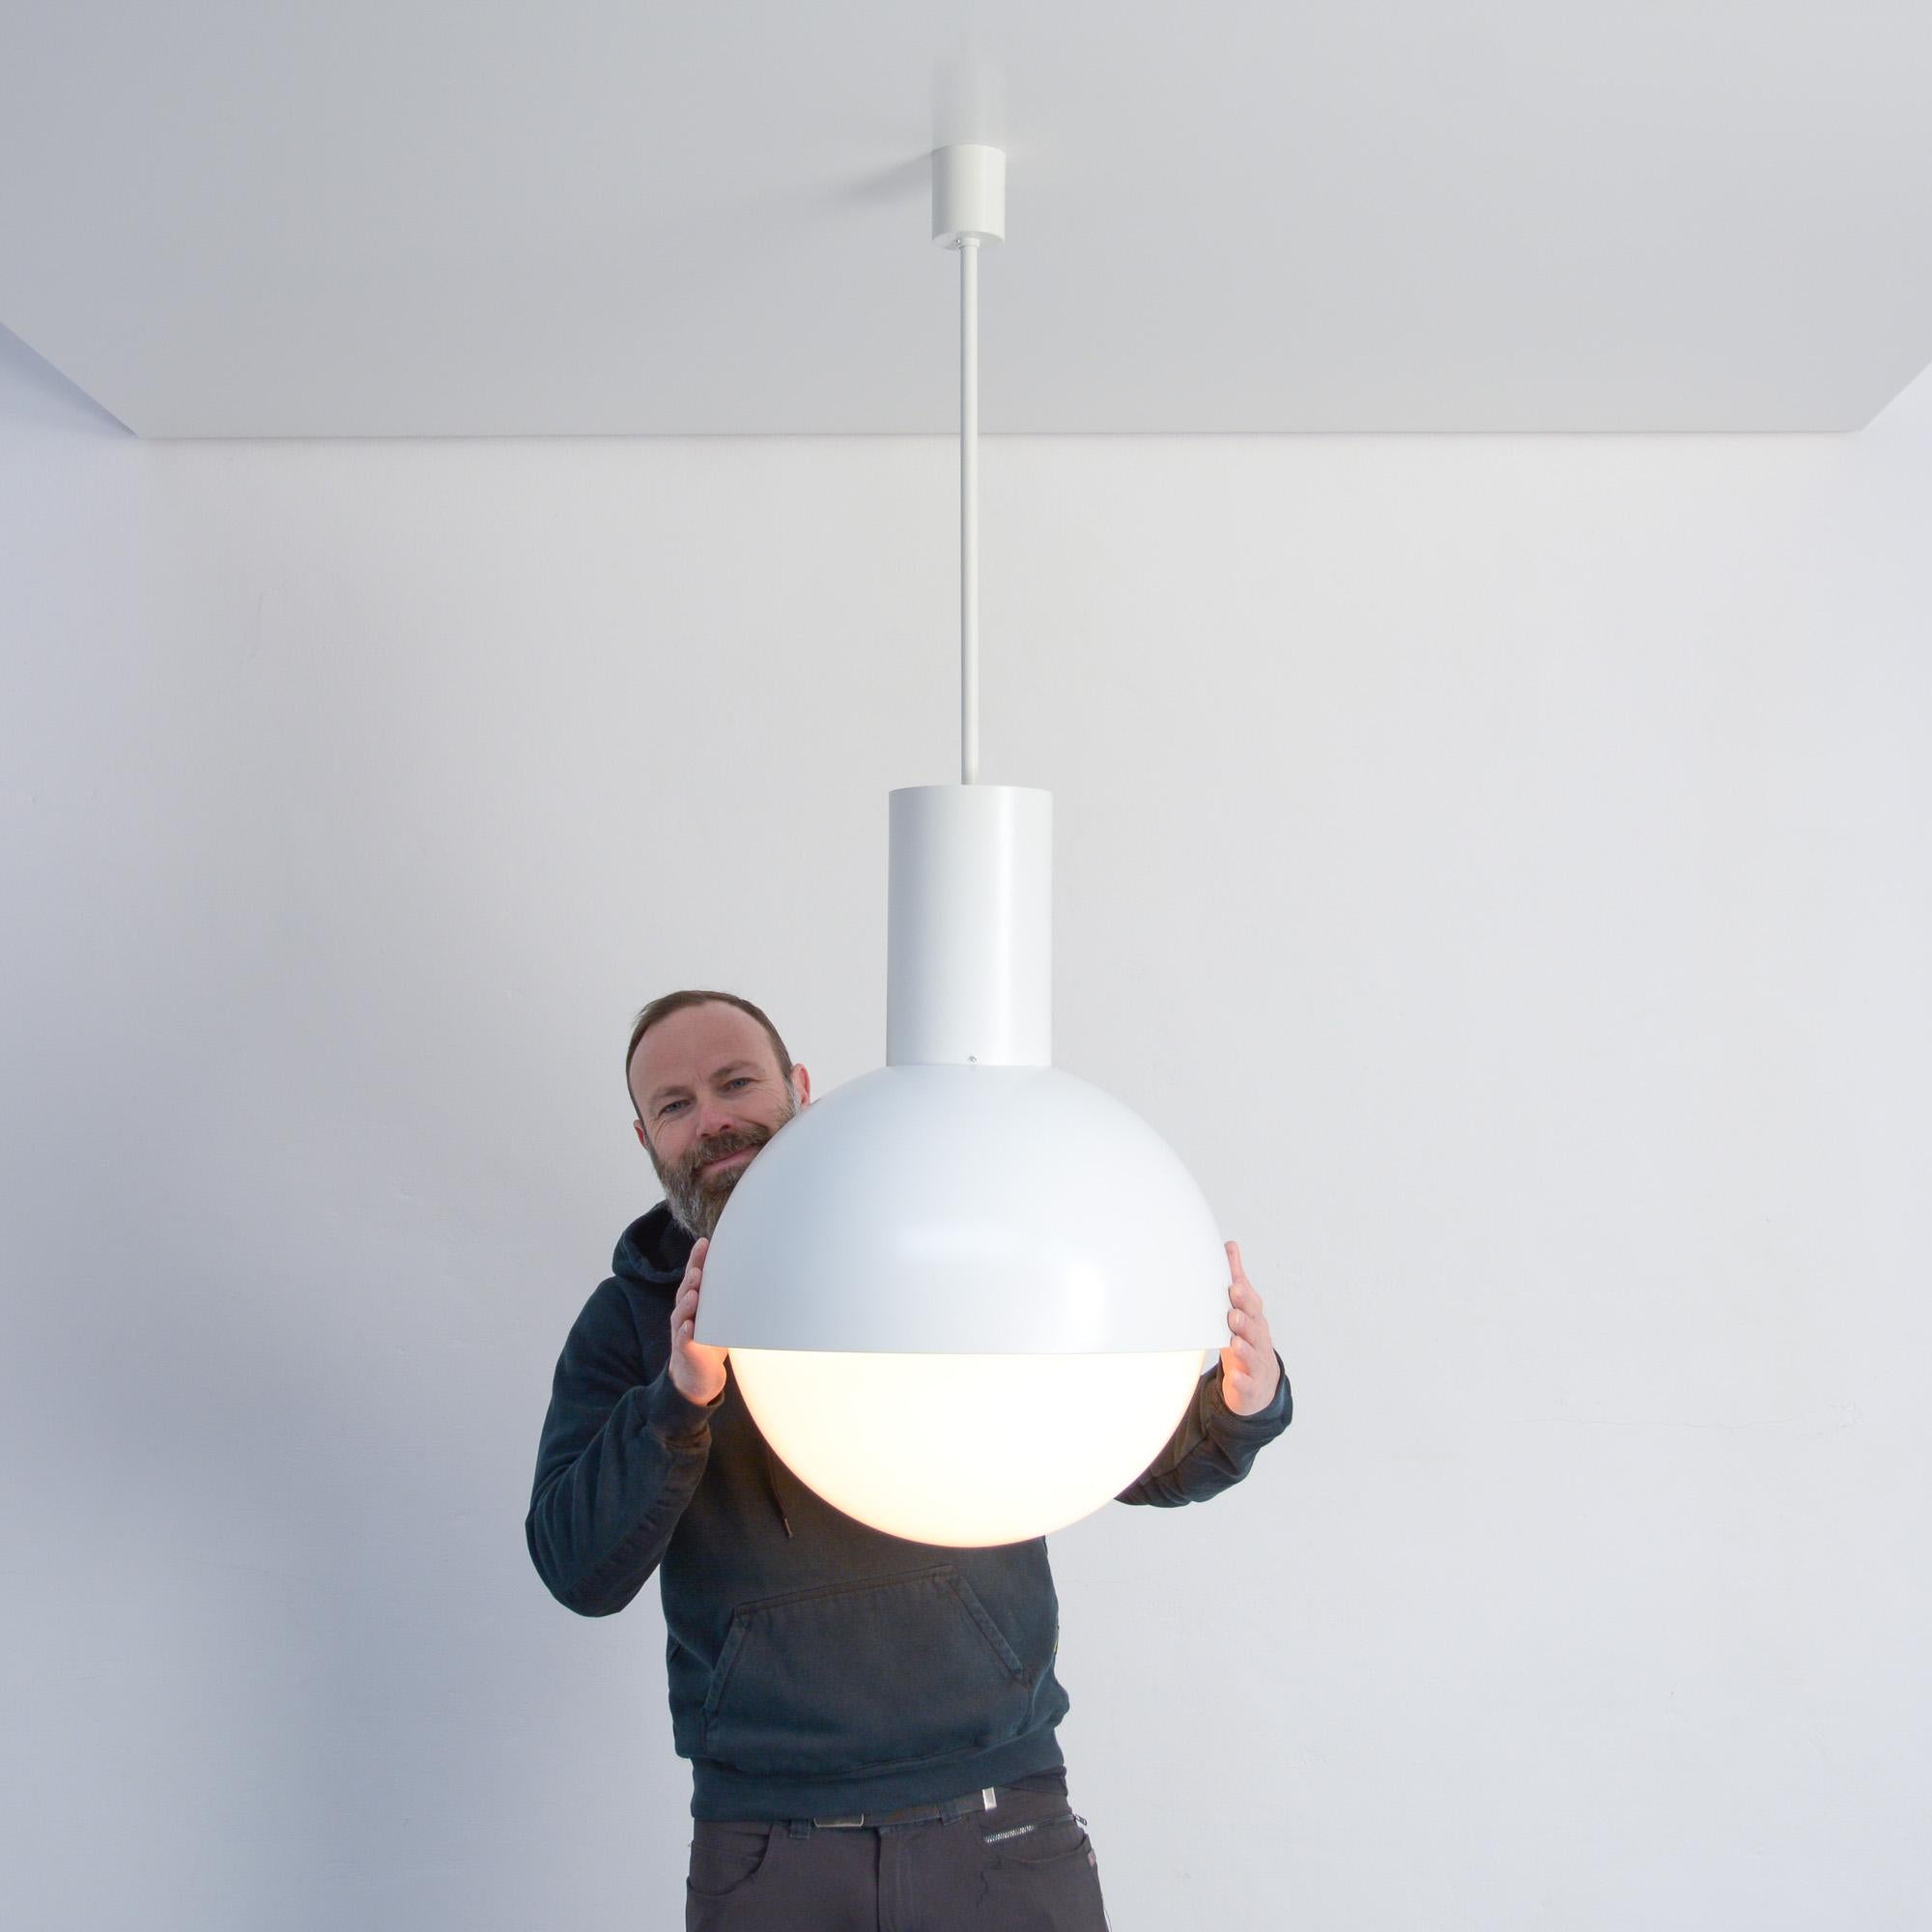 These white pendant lamps of the 1970s were manufactured by BEGA and Glashütte Limburg.
The white lacquered metal base (BEGA) holds the large opaline glass ball (Limburg).
Those lamps were once illuminating a church.
The effect of using different